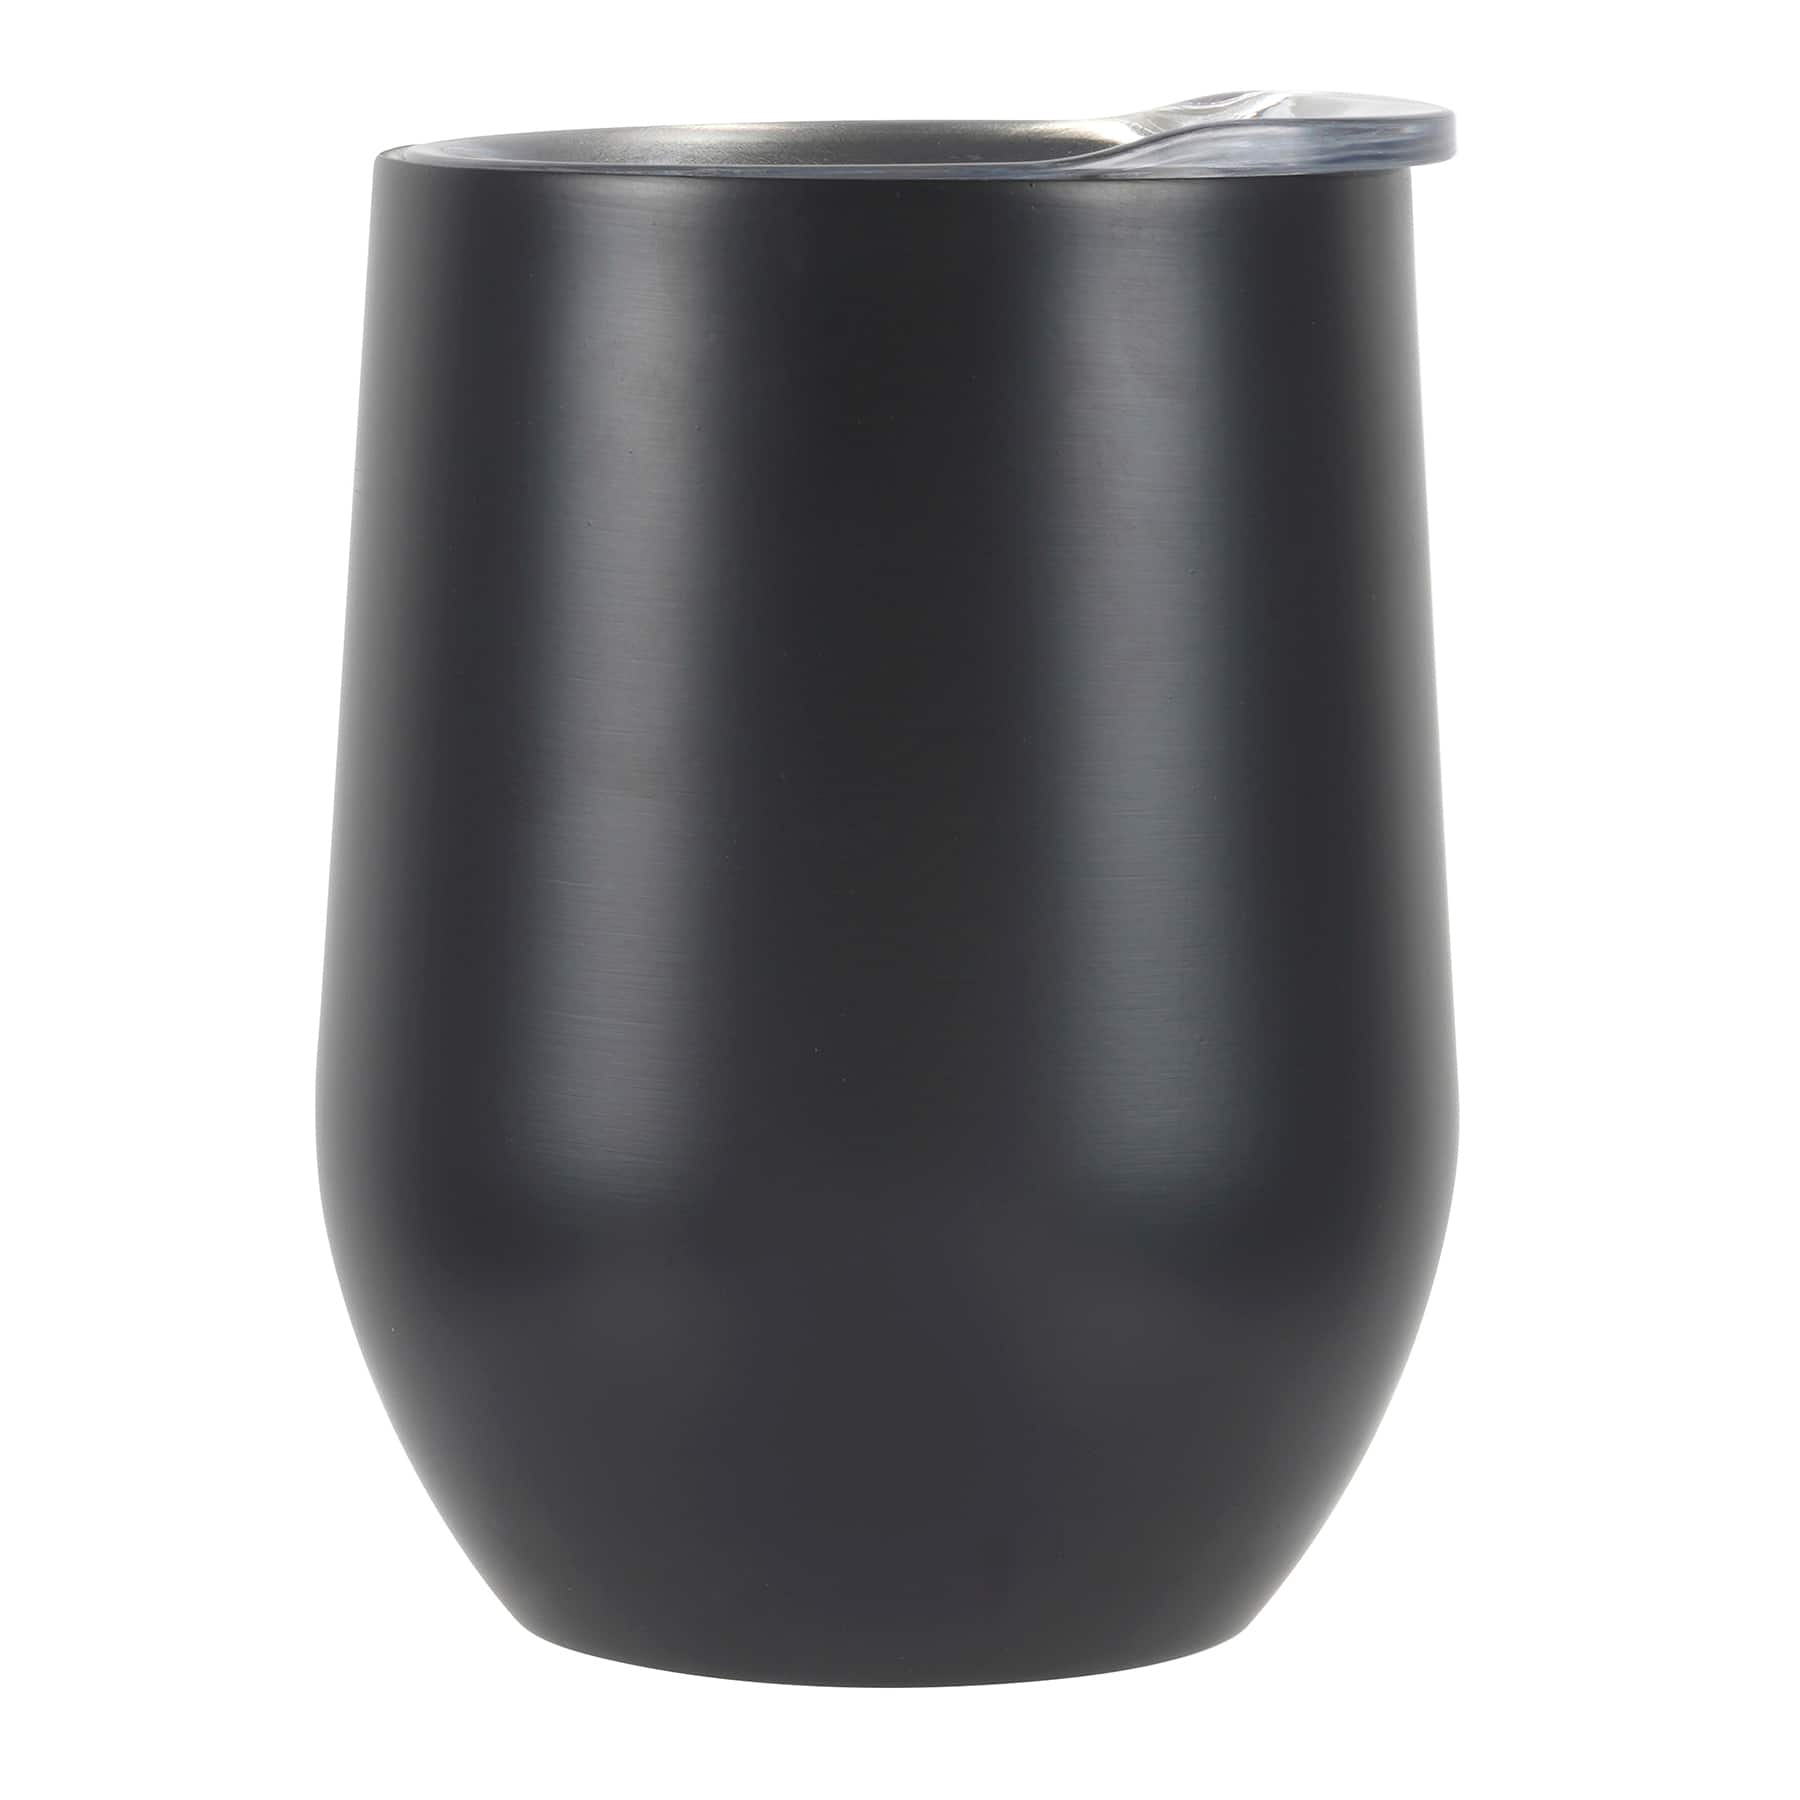 12oz. Stainless Steel Wine Tumbler by Celebrate It™